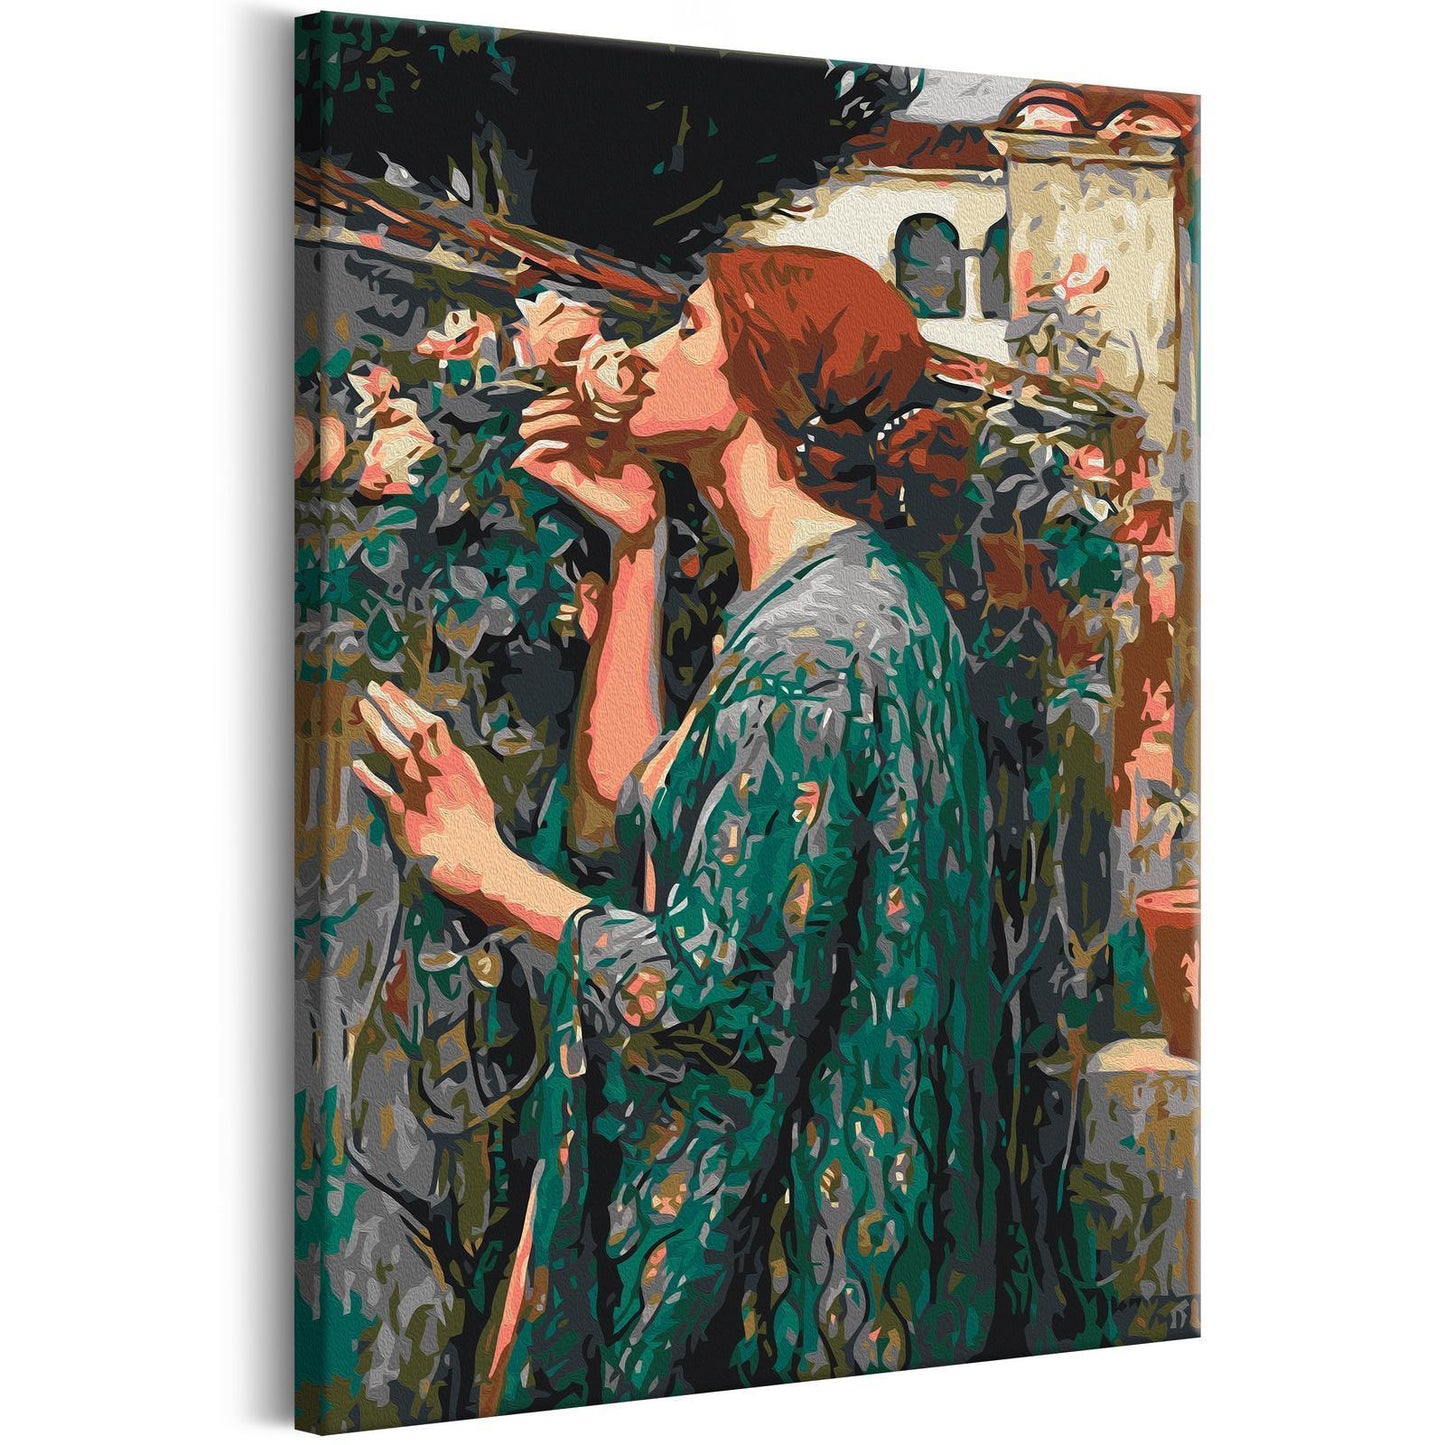 DIY canvas painting - John William Waterhouse: The Soul of the Rose 